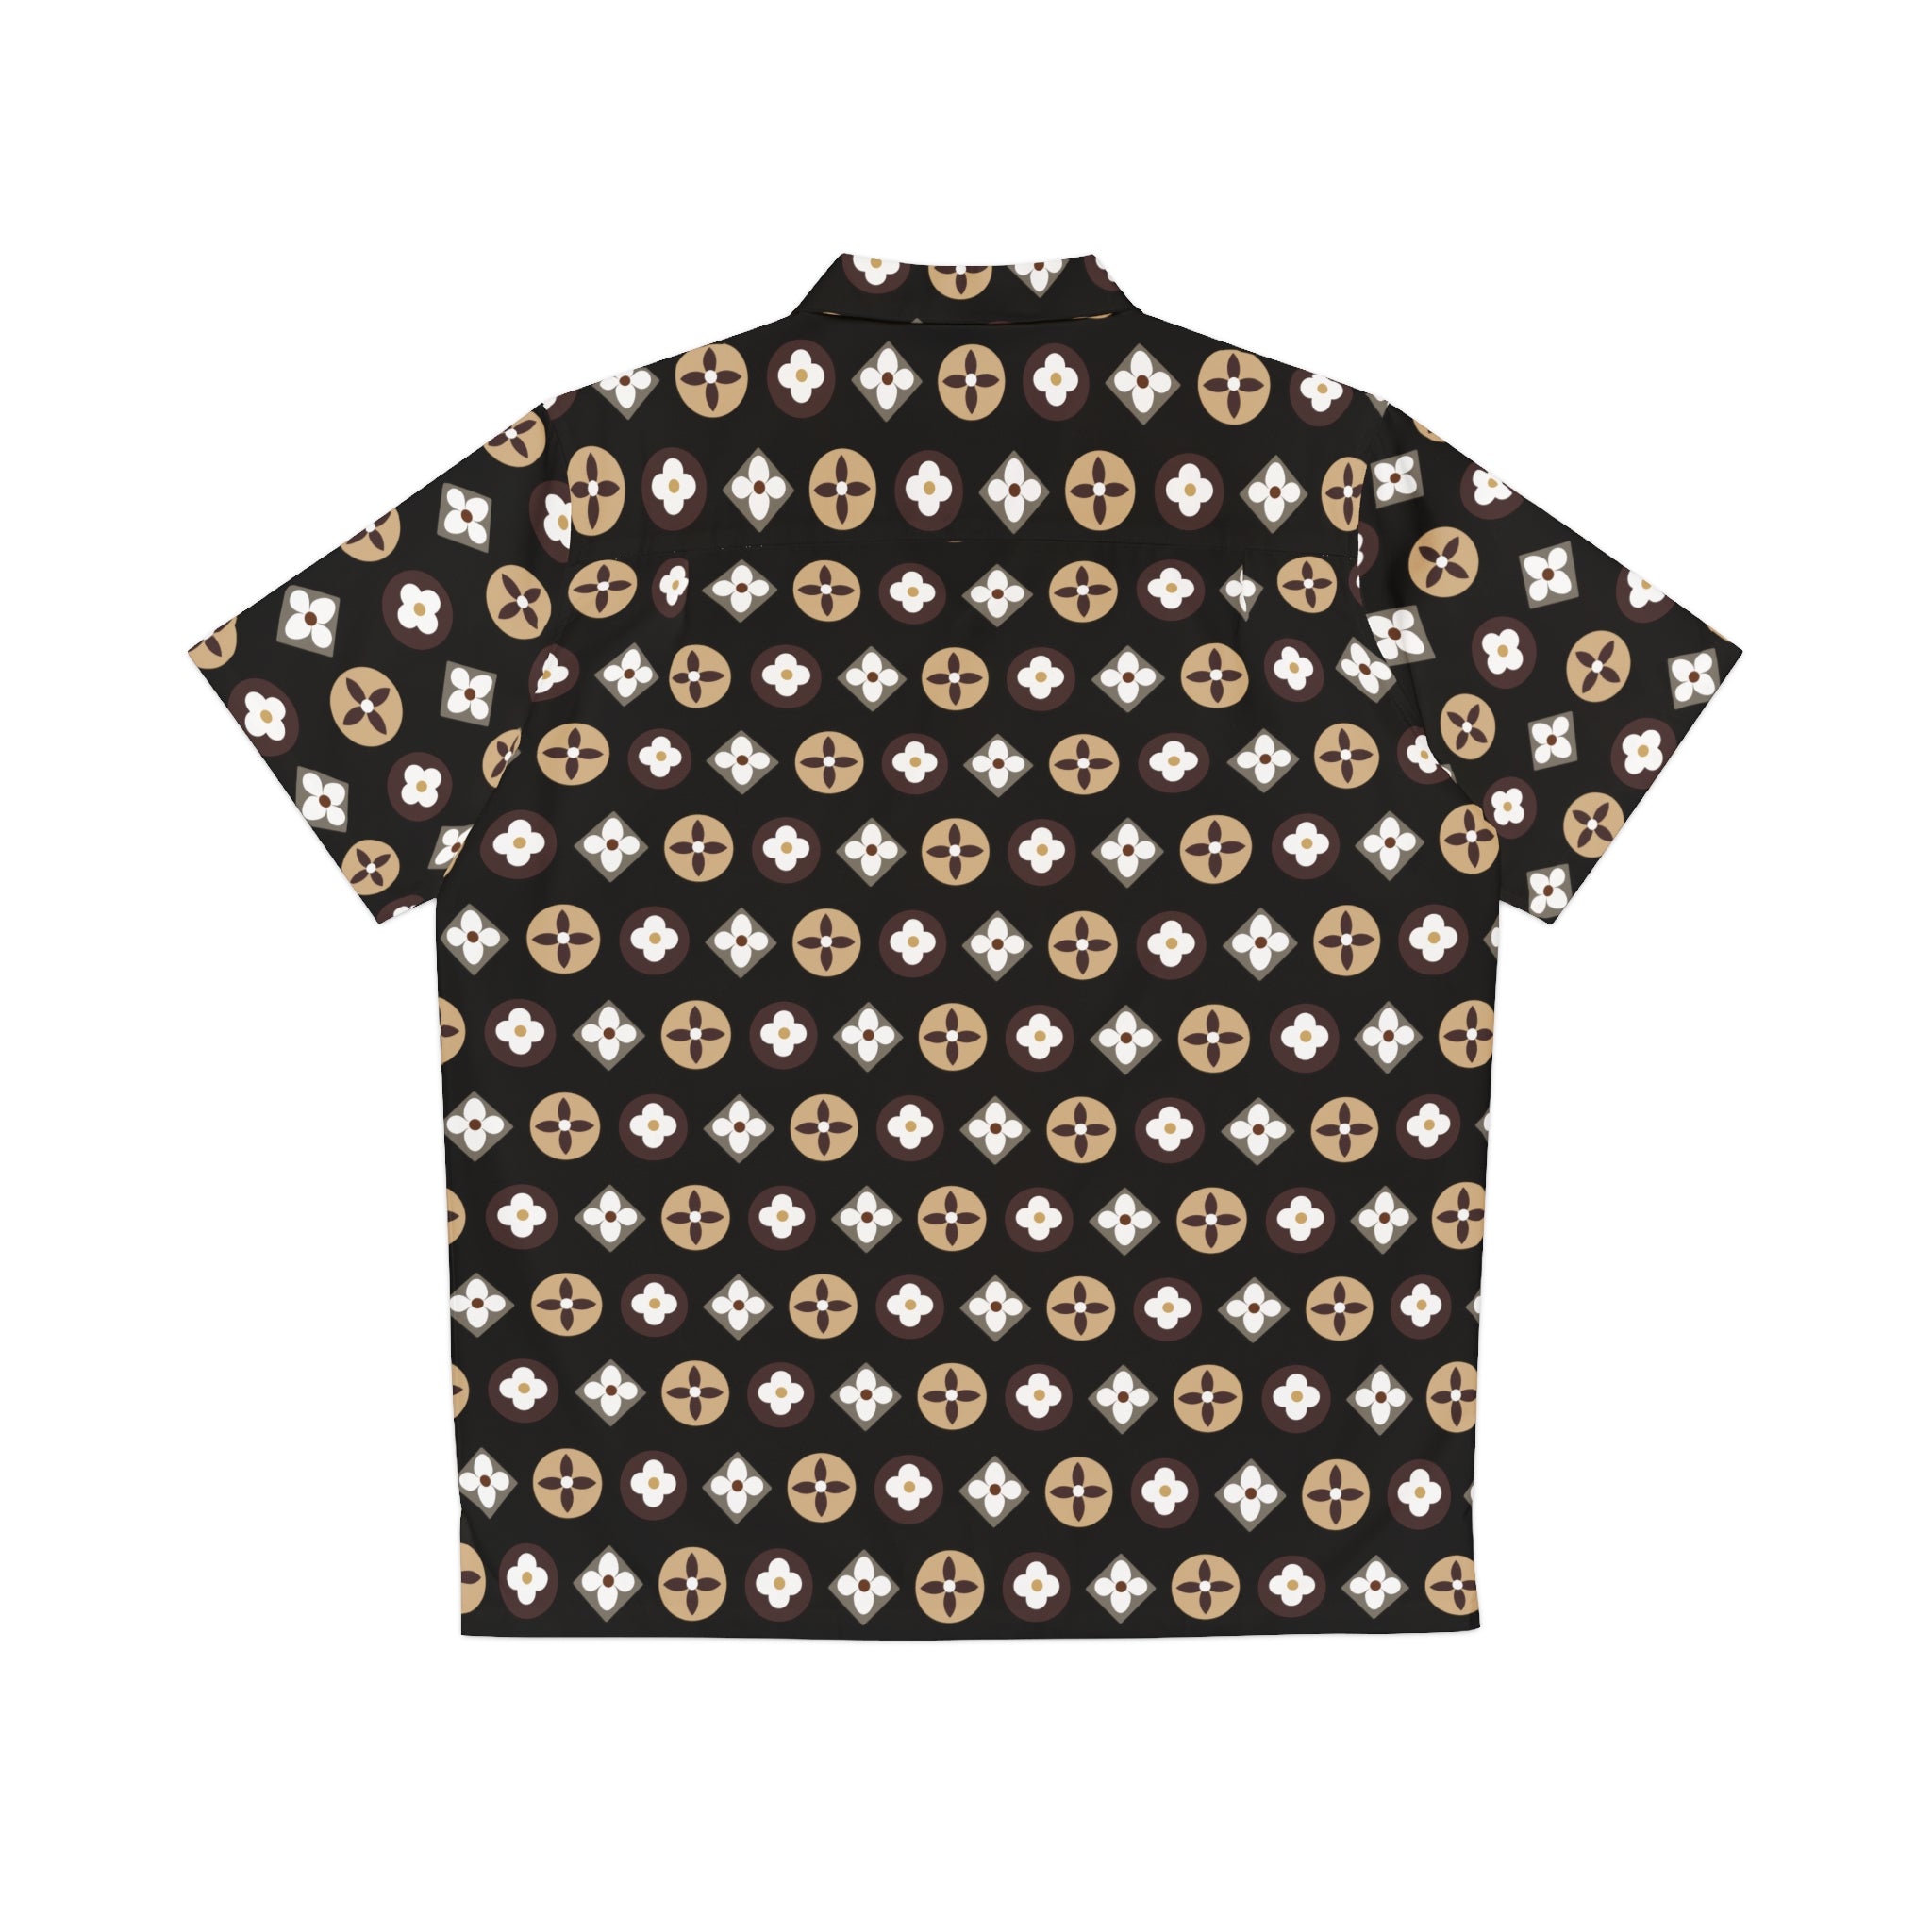 Groove Collection Trilogy of Icons Pattern (Browns) Black Unisex Gender Neutral Button Up Shirt, Hawaiian Shirt